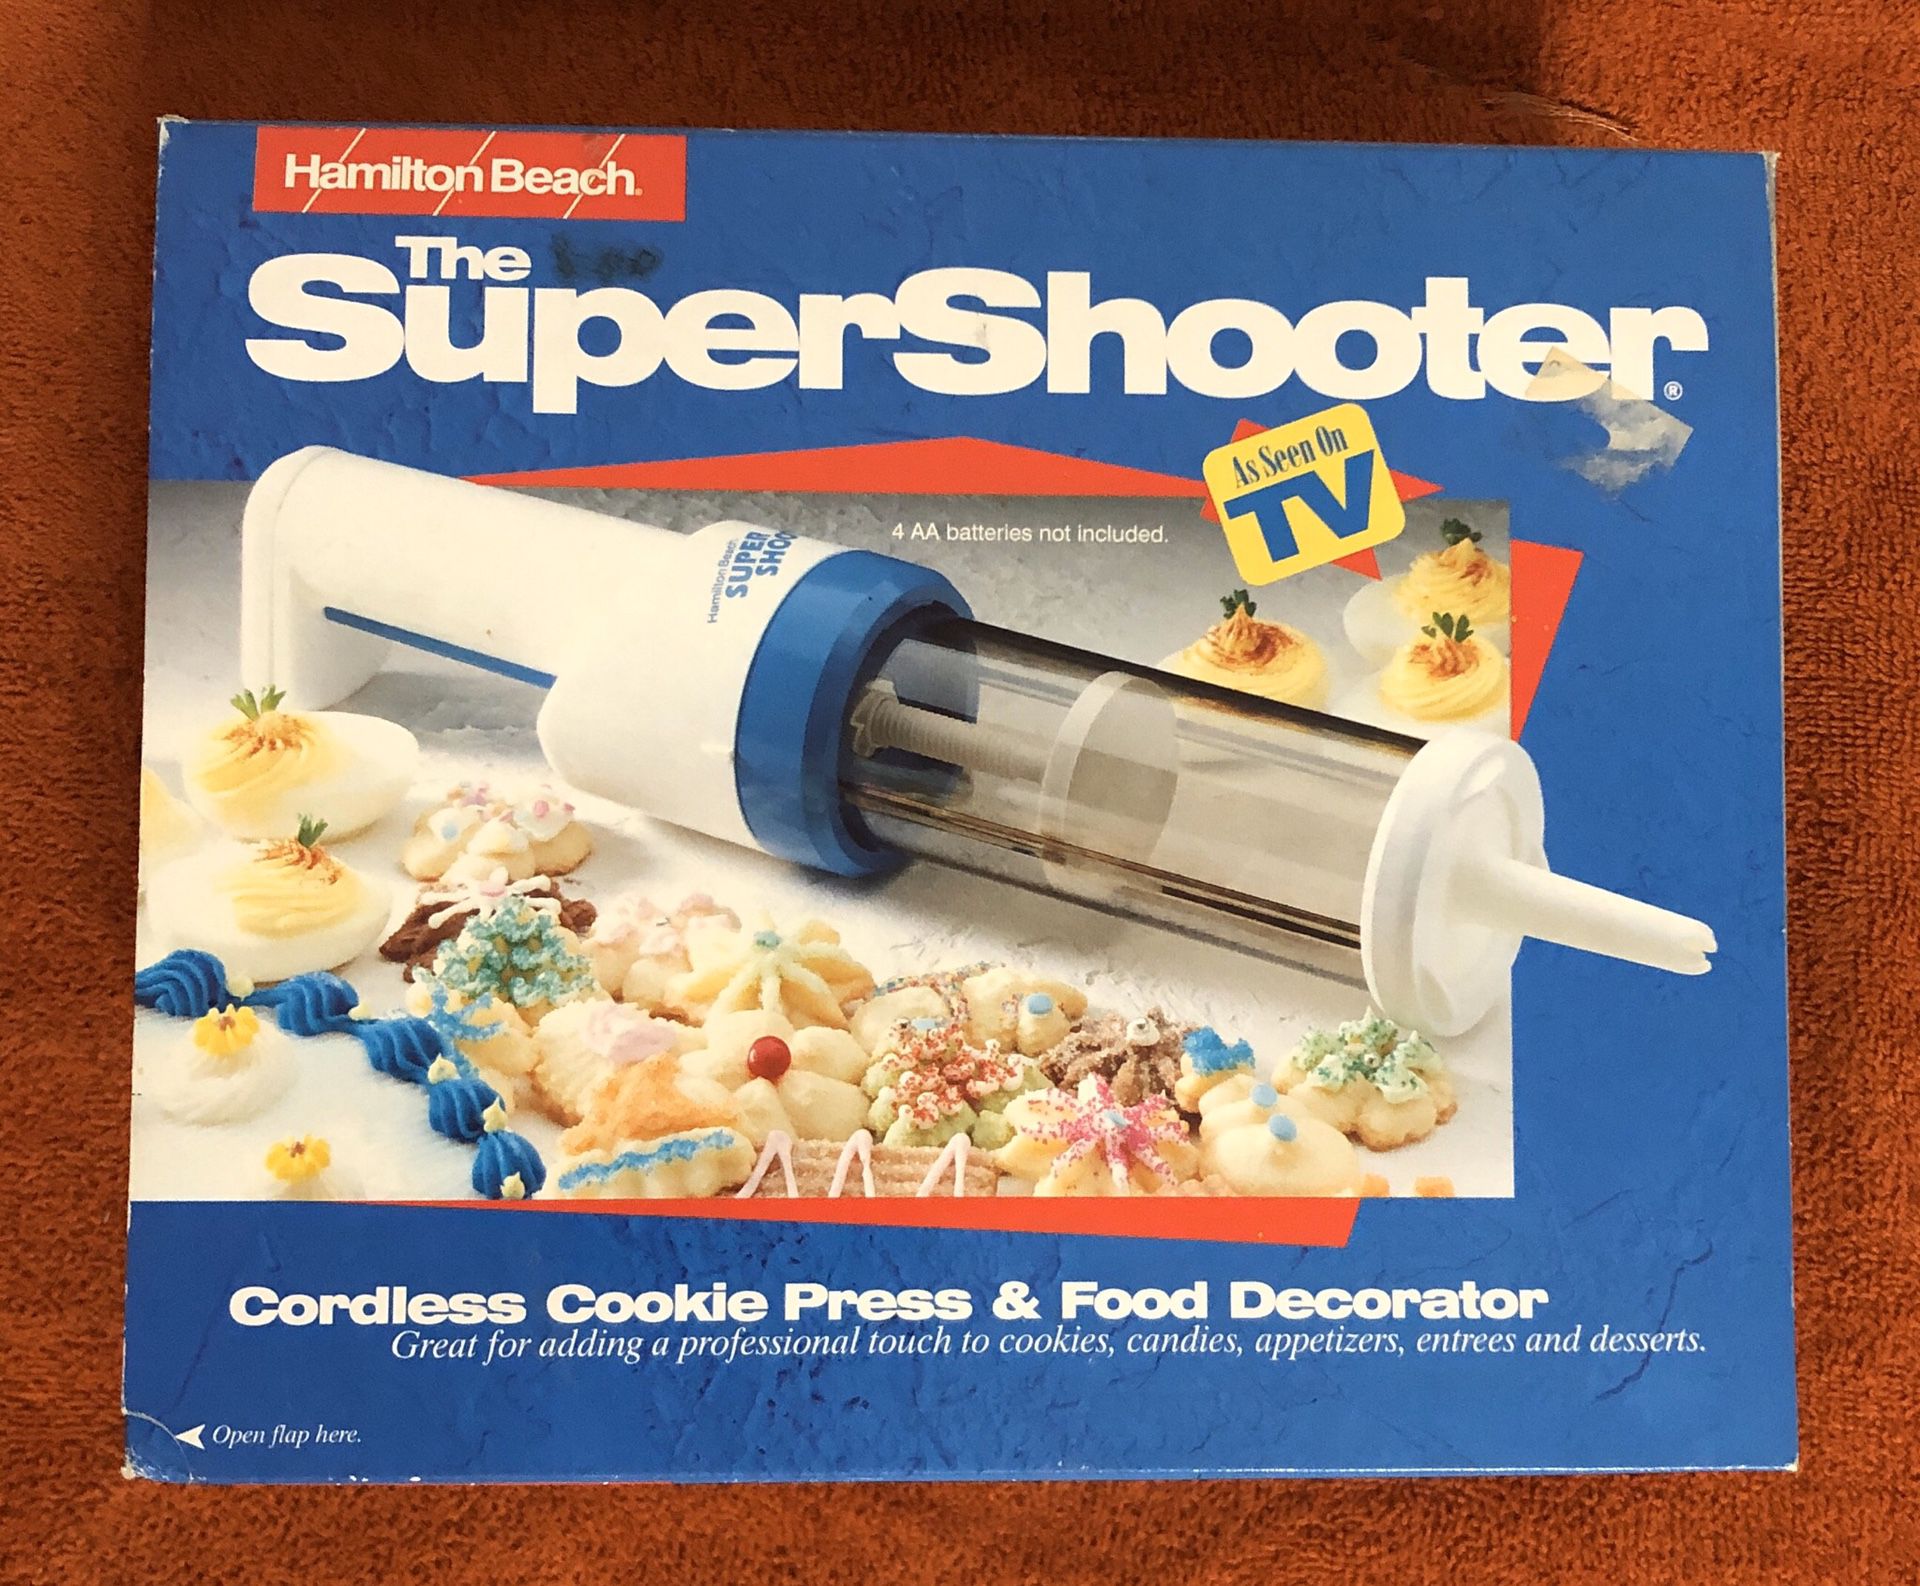 HAMILTON BEACH SUPER SHOOTER CORDLESS COOKIE PRESS AND FOOD DECORATOR - Cash & Carry or Will Ship